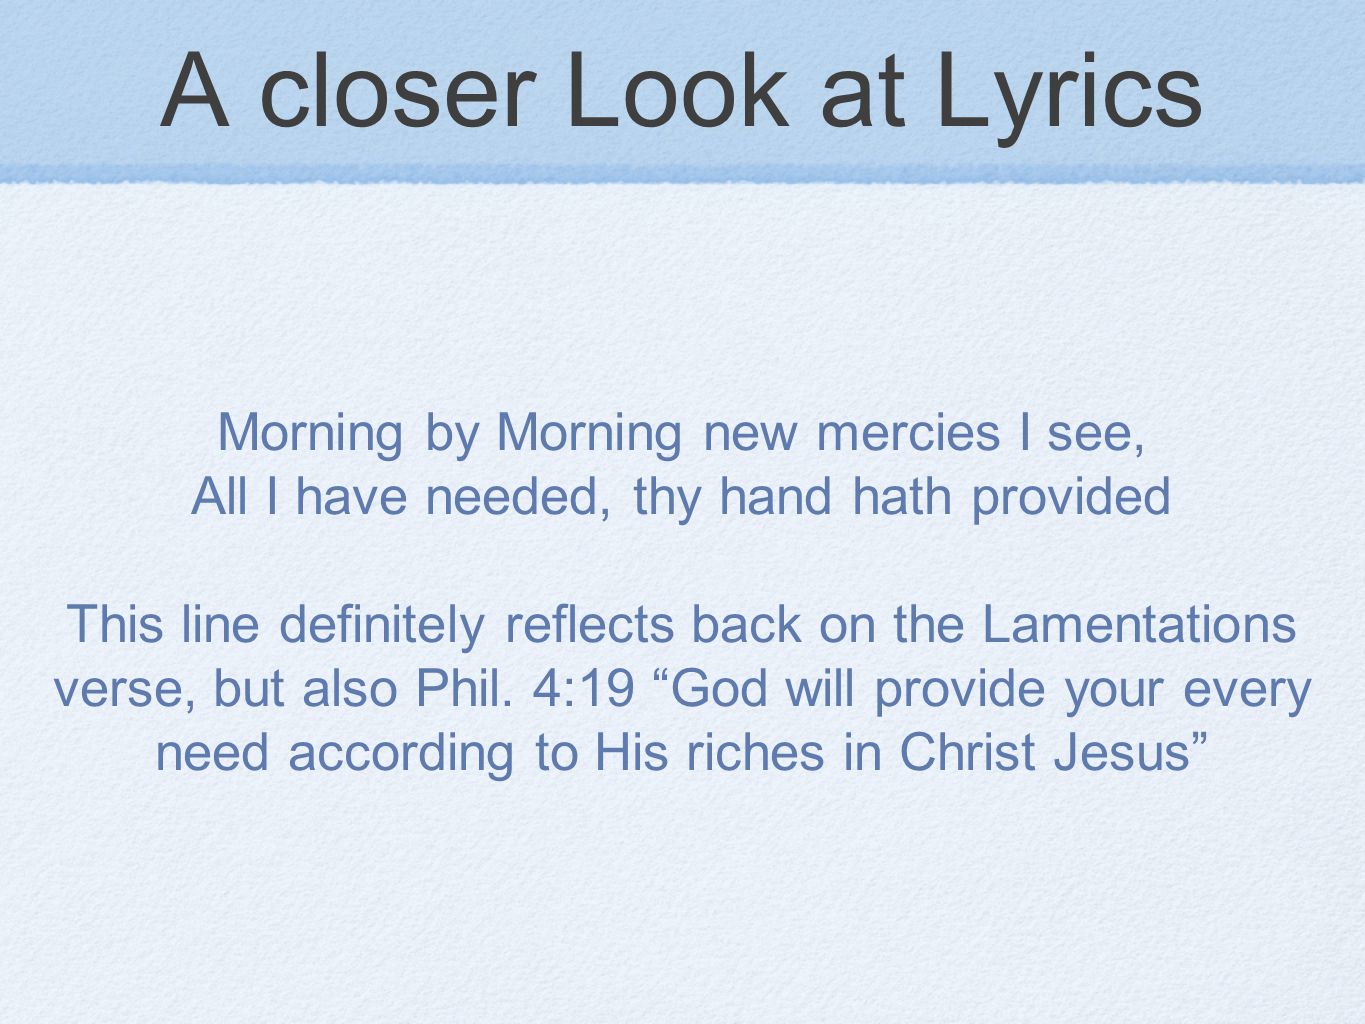 A closer Look at Lyrics Morning by Morning new mercies I see, All I have needed, thy hand hath provided This line definitely reflects back on the Lamentations verse, but also Phil.